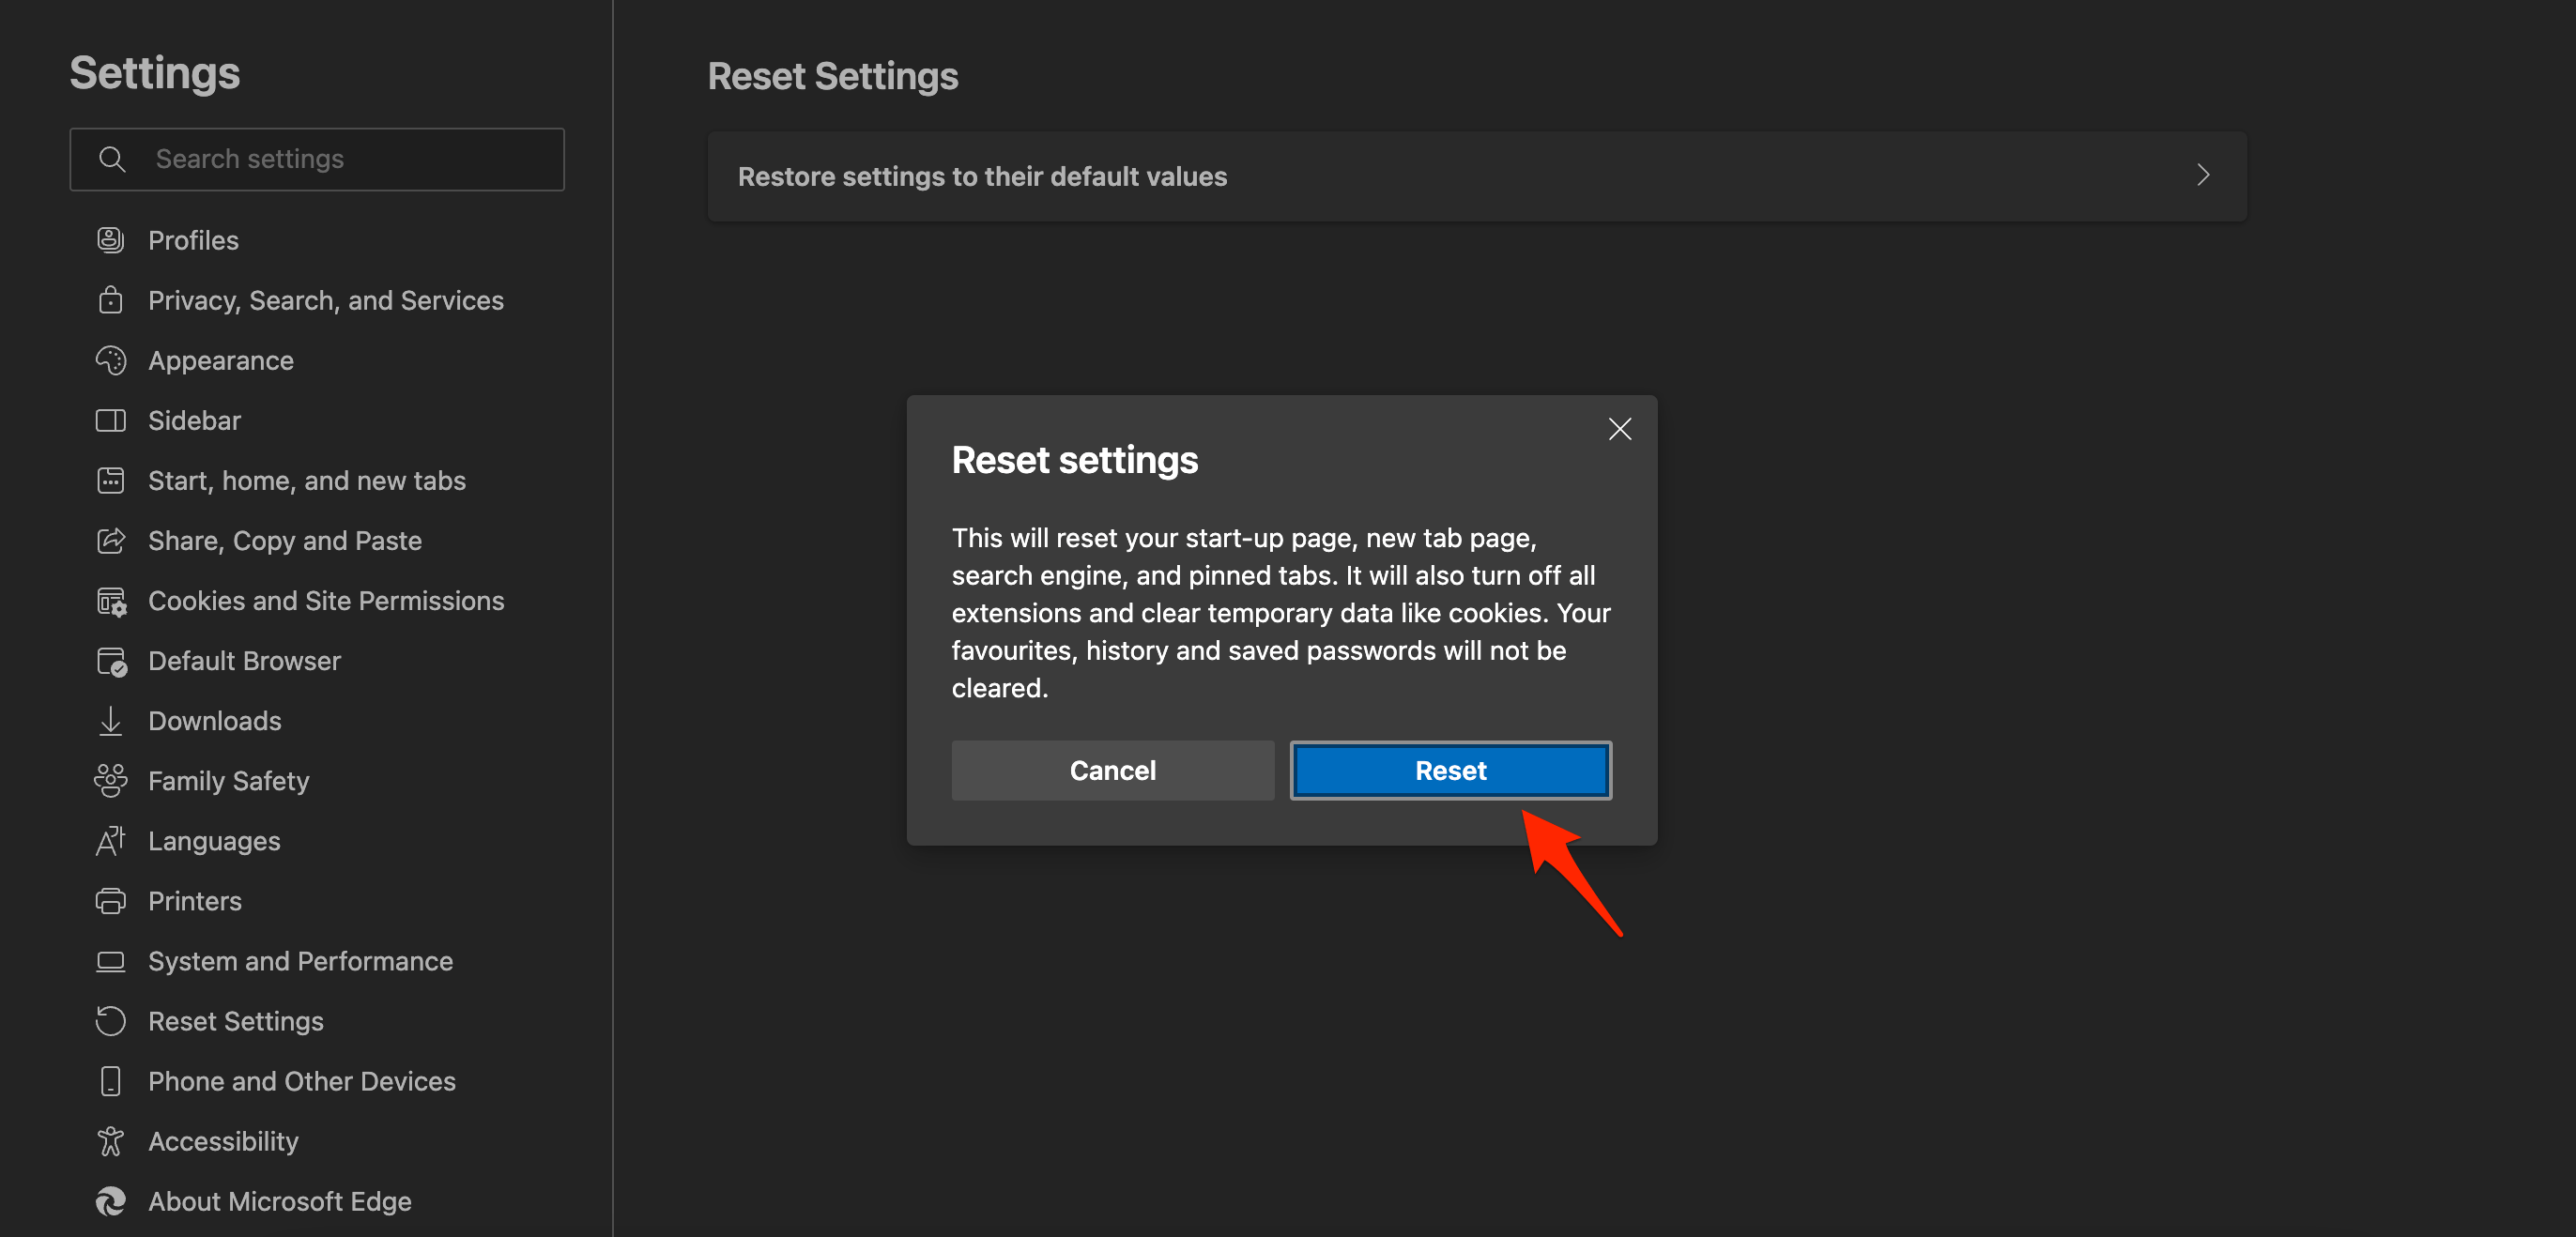 Confirm by clicking on the Reset button